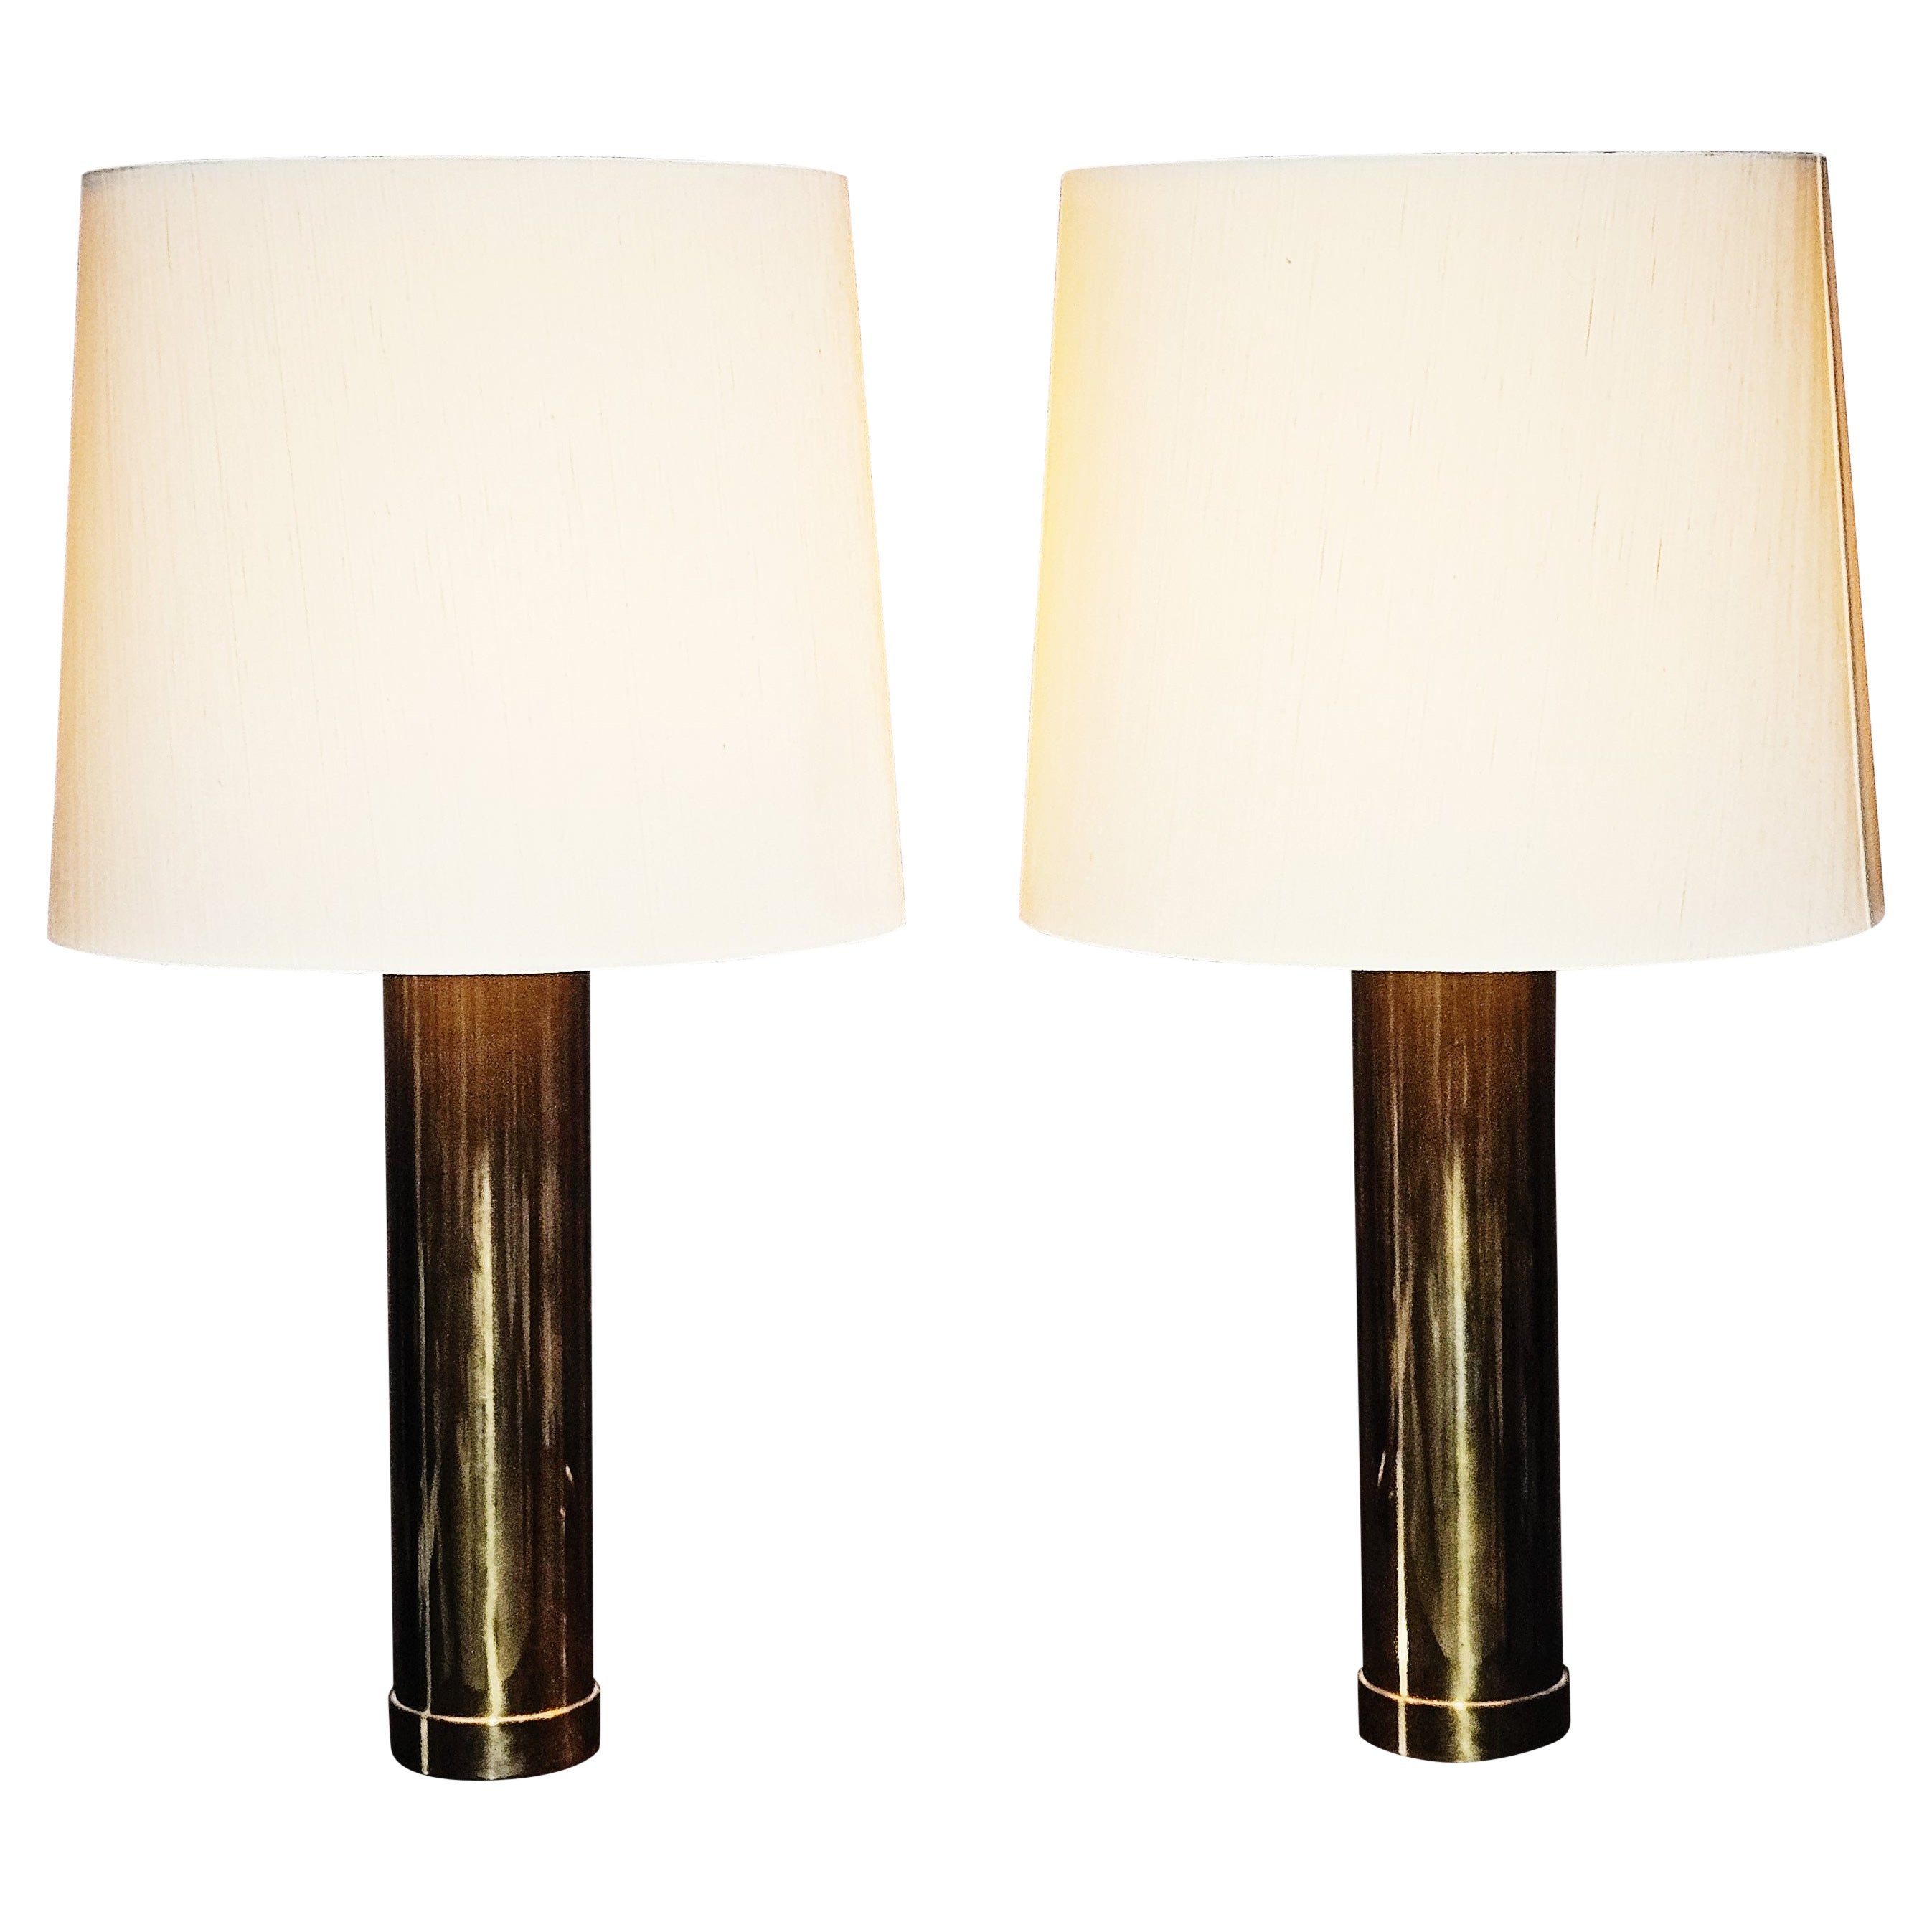 Pair of brass table lamps 'B-09' by Bergboms, Sweden, 1960s For Sale